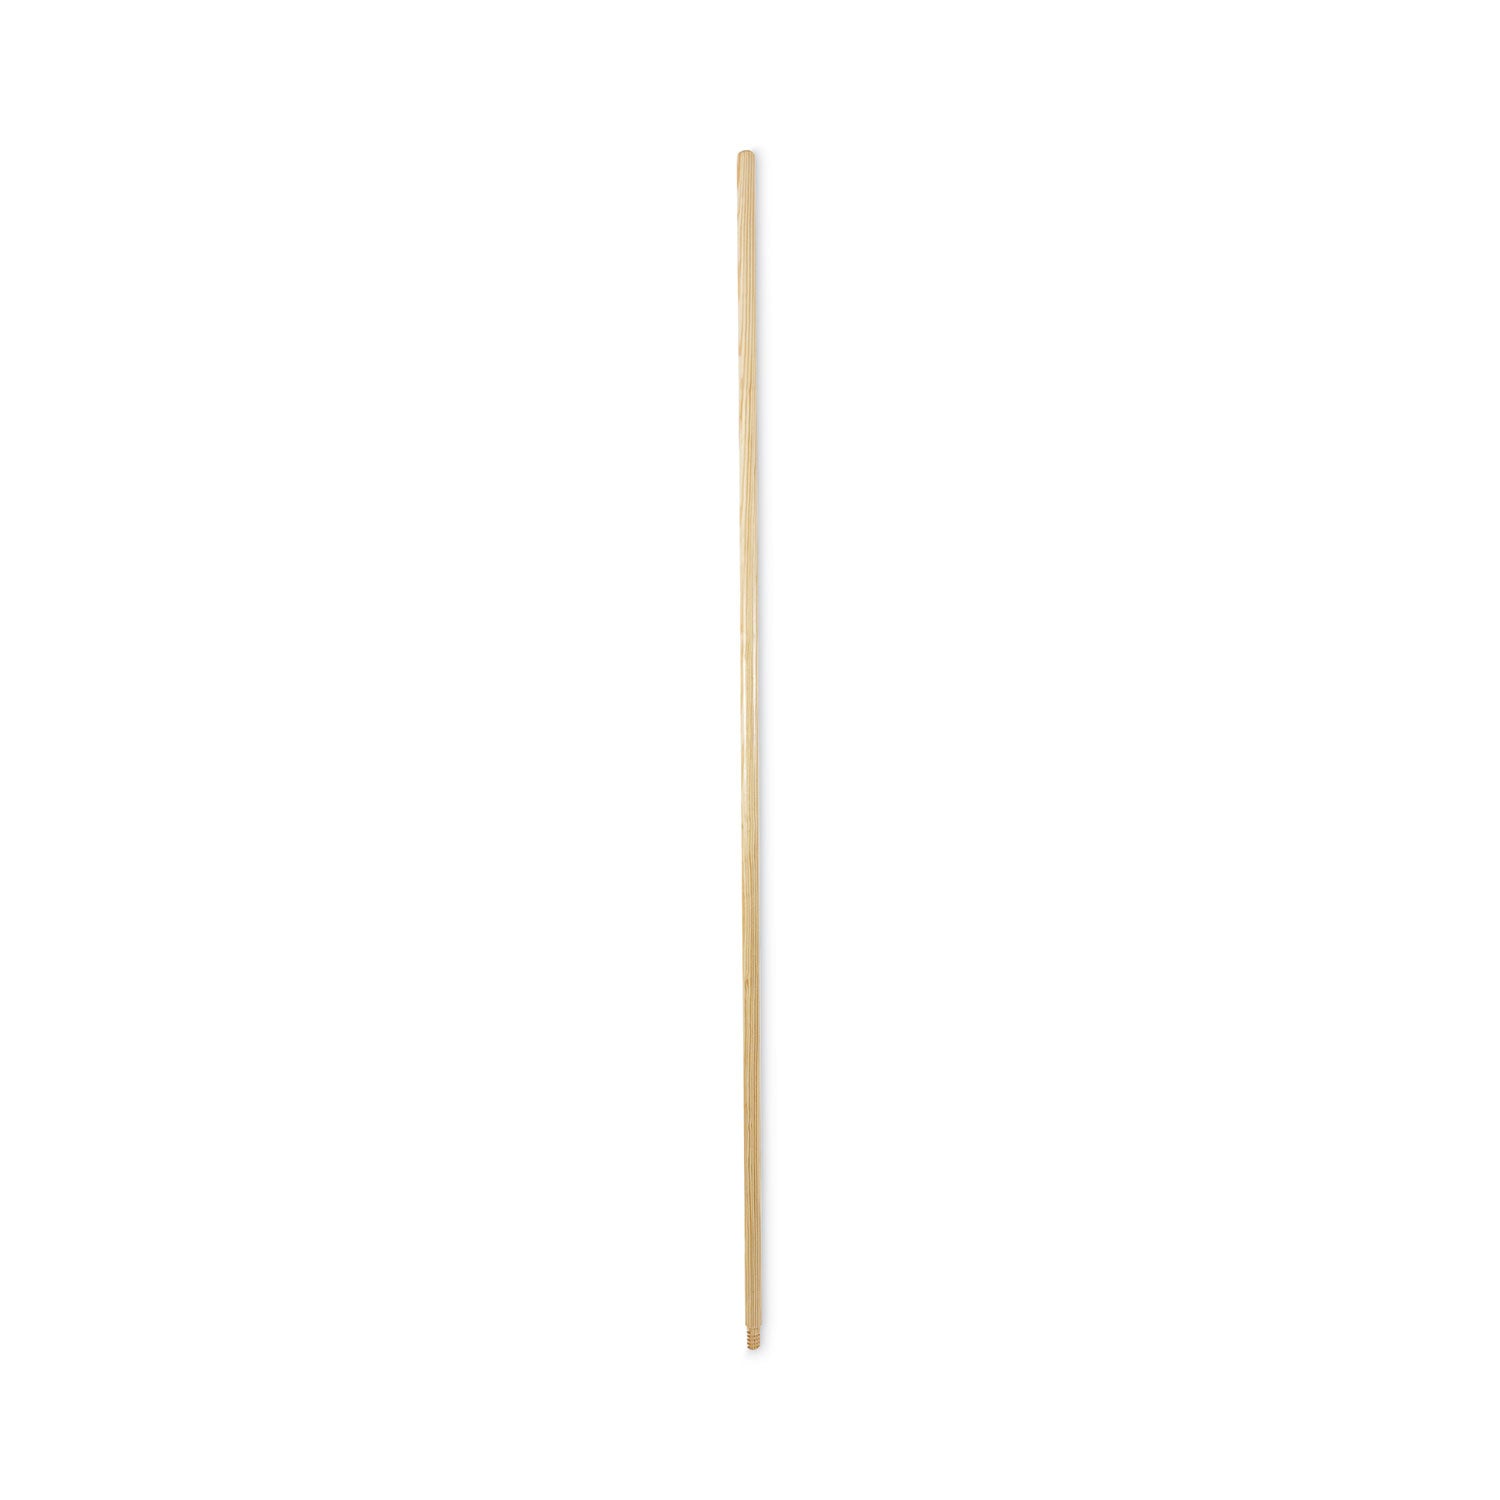 Threaded End Broom Handle, Lacquered Wood, 0.94" dia x 60", Natural - 